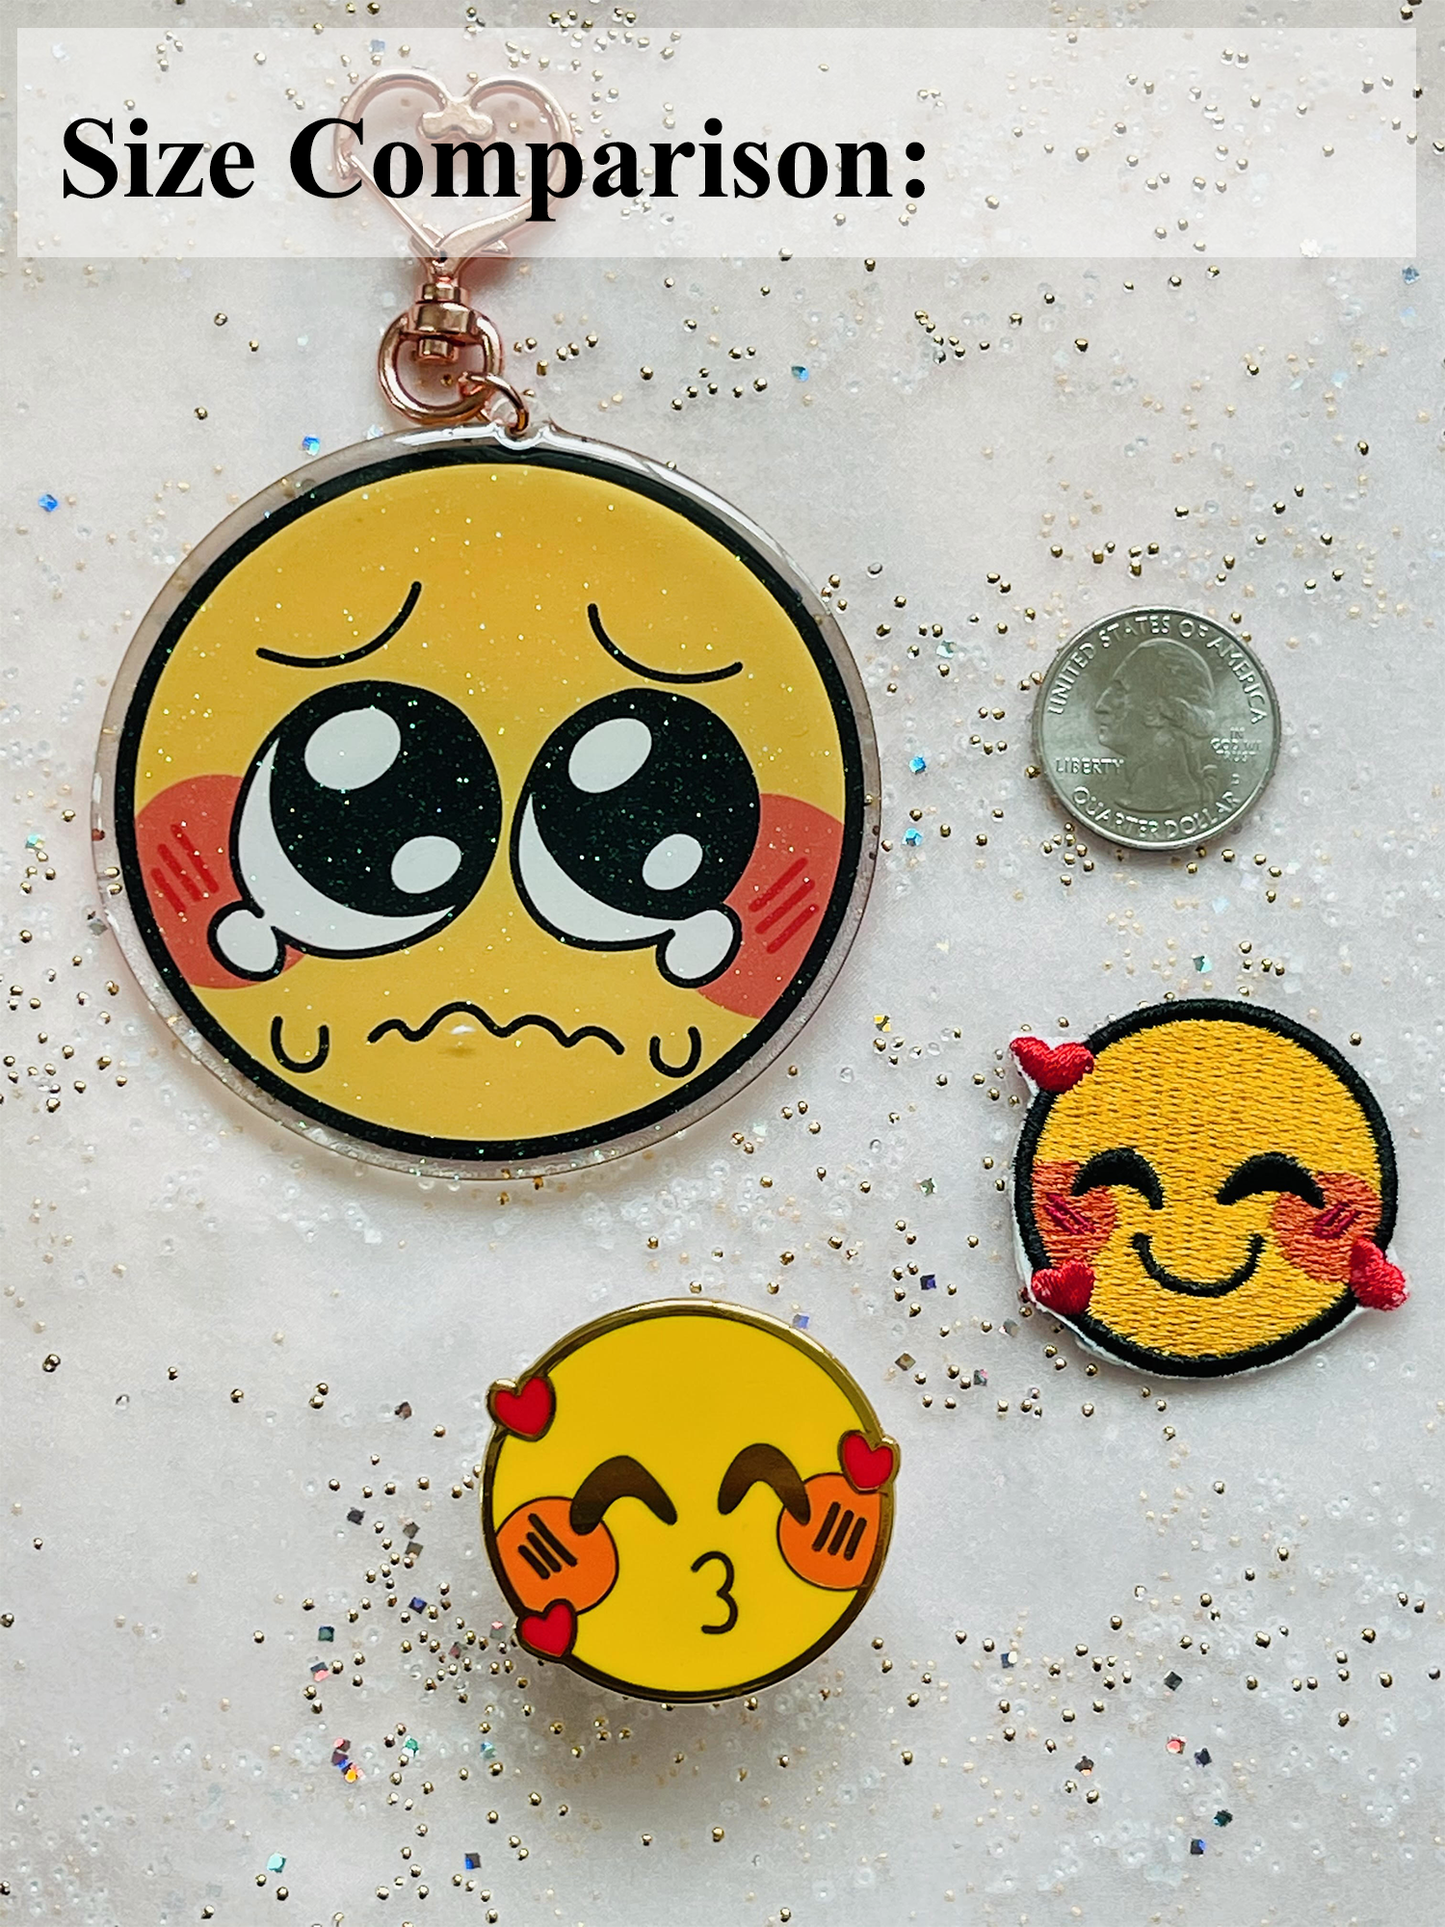 An acrylic charm, pin, and patch shown next to a quarter as a size comparison. The pin and patch are the same size, and are 1.5 times the size of the quarter. The acrylic charm is double the size of the pin and patch.